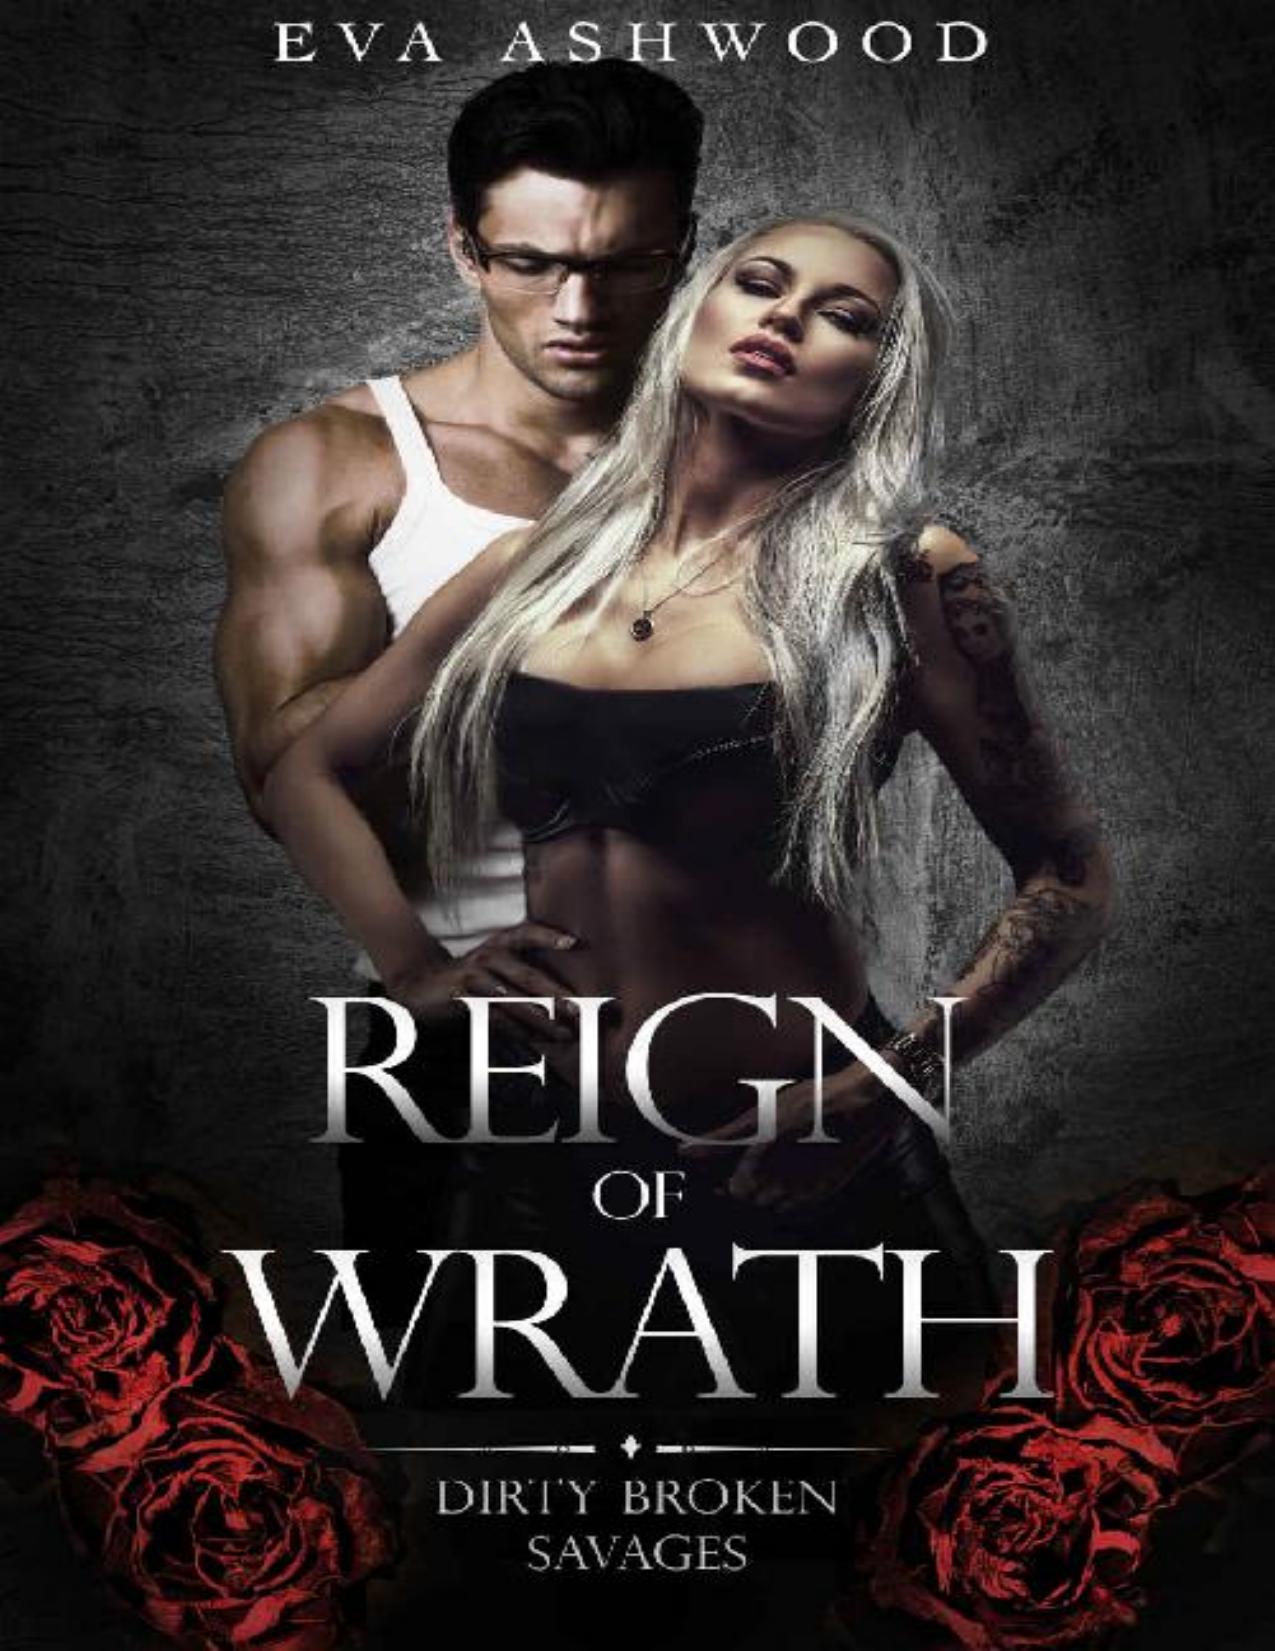 Reign of Wrath